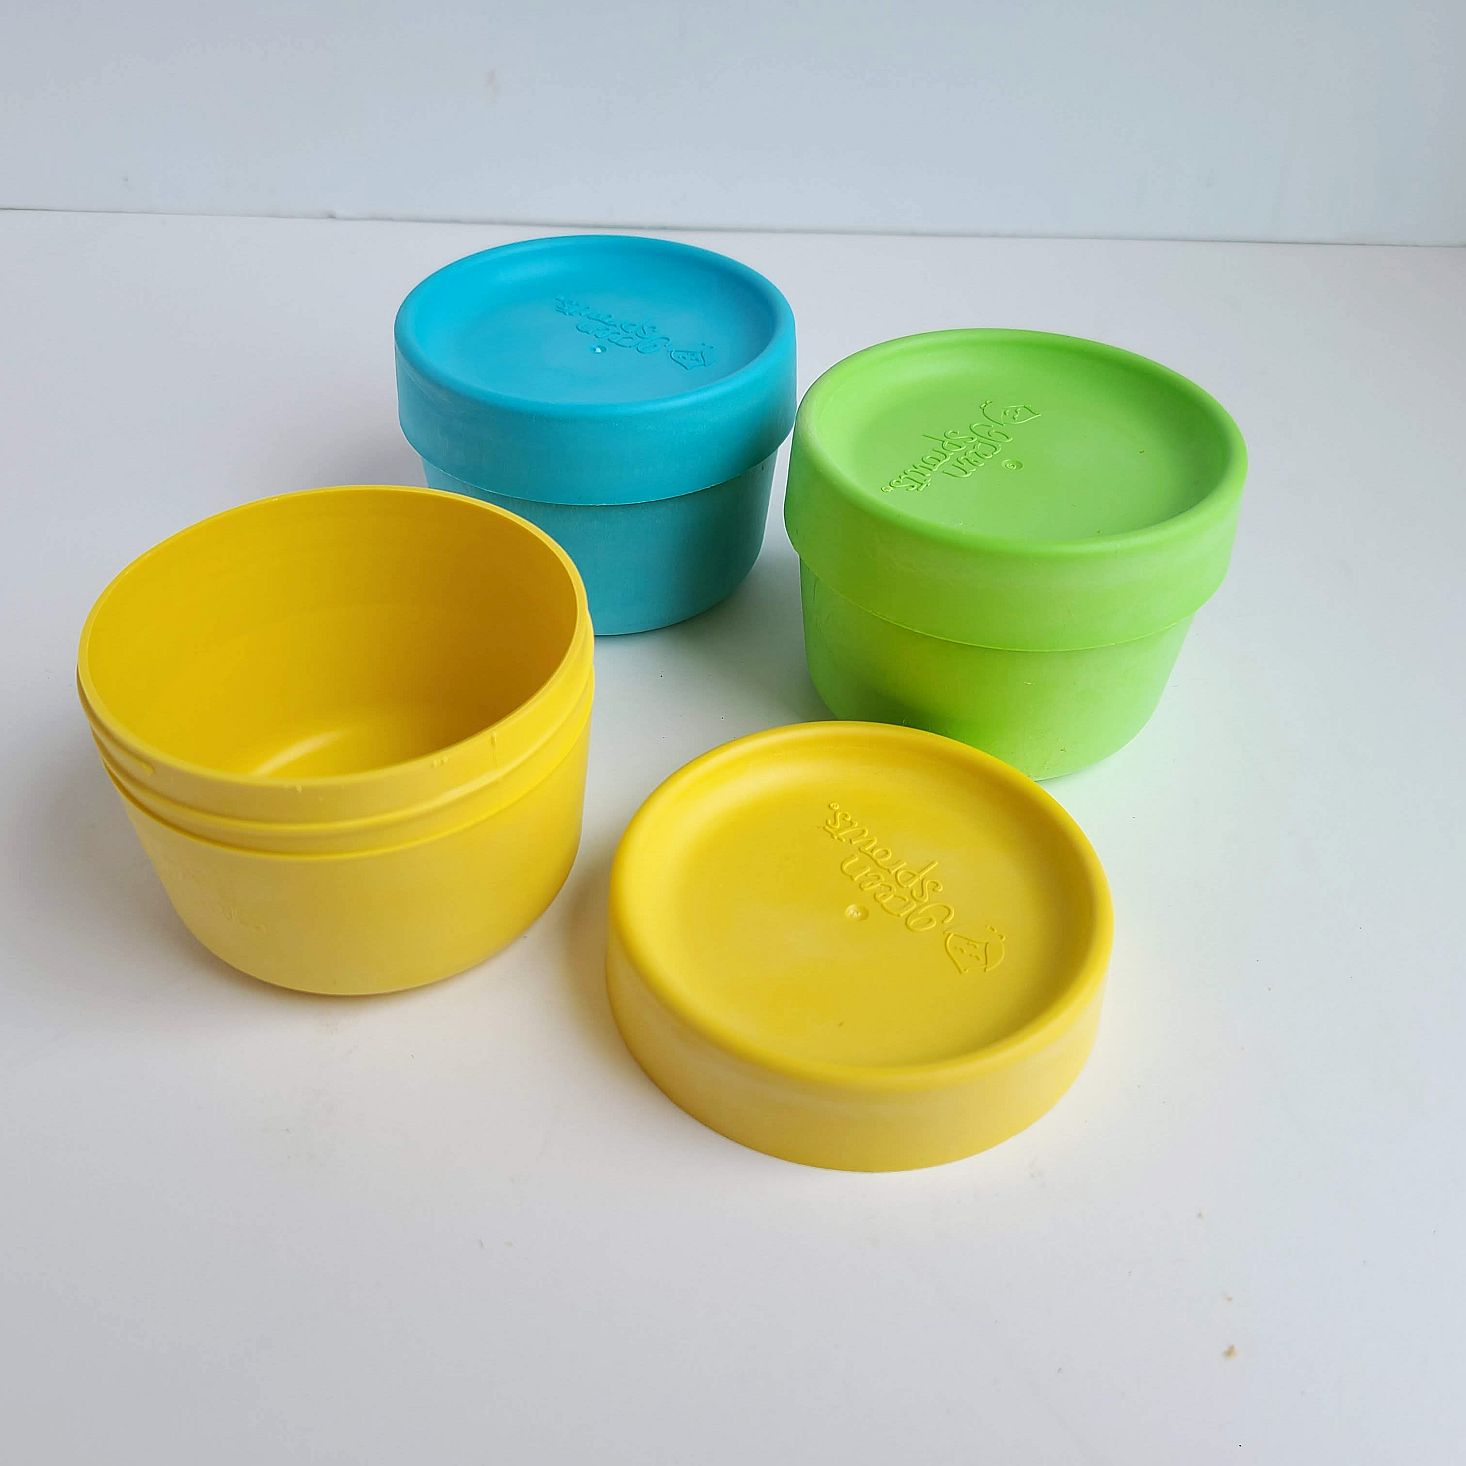 Ecocentric Moms Box November 2020 snack cups open